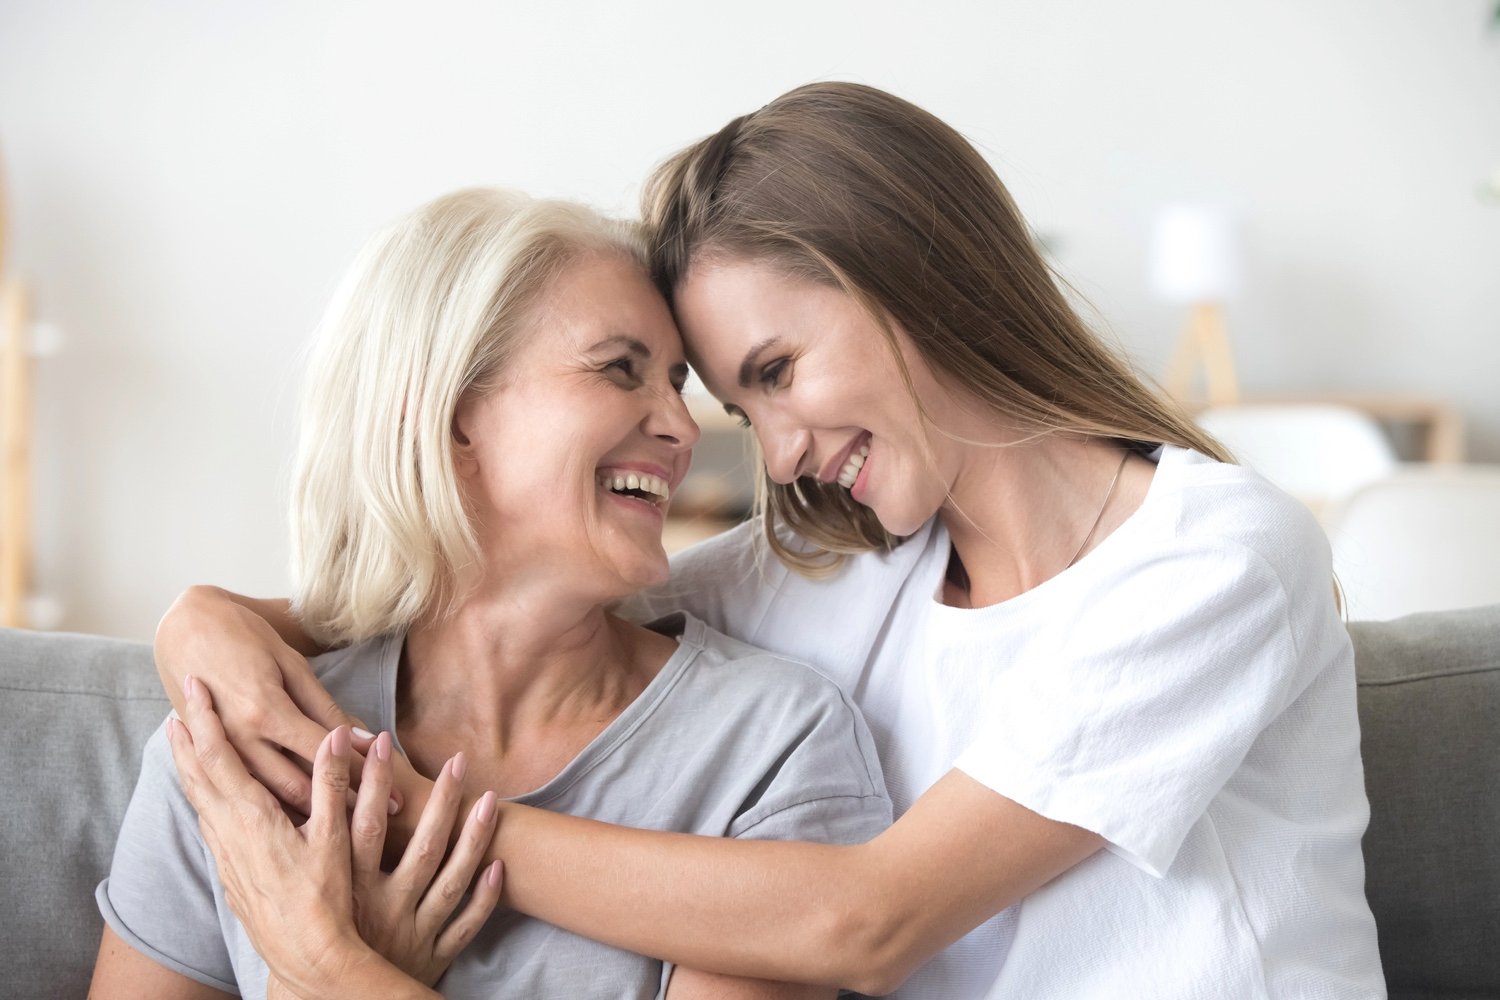 A senior woman and her daughter smiling and embracing each other